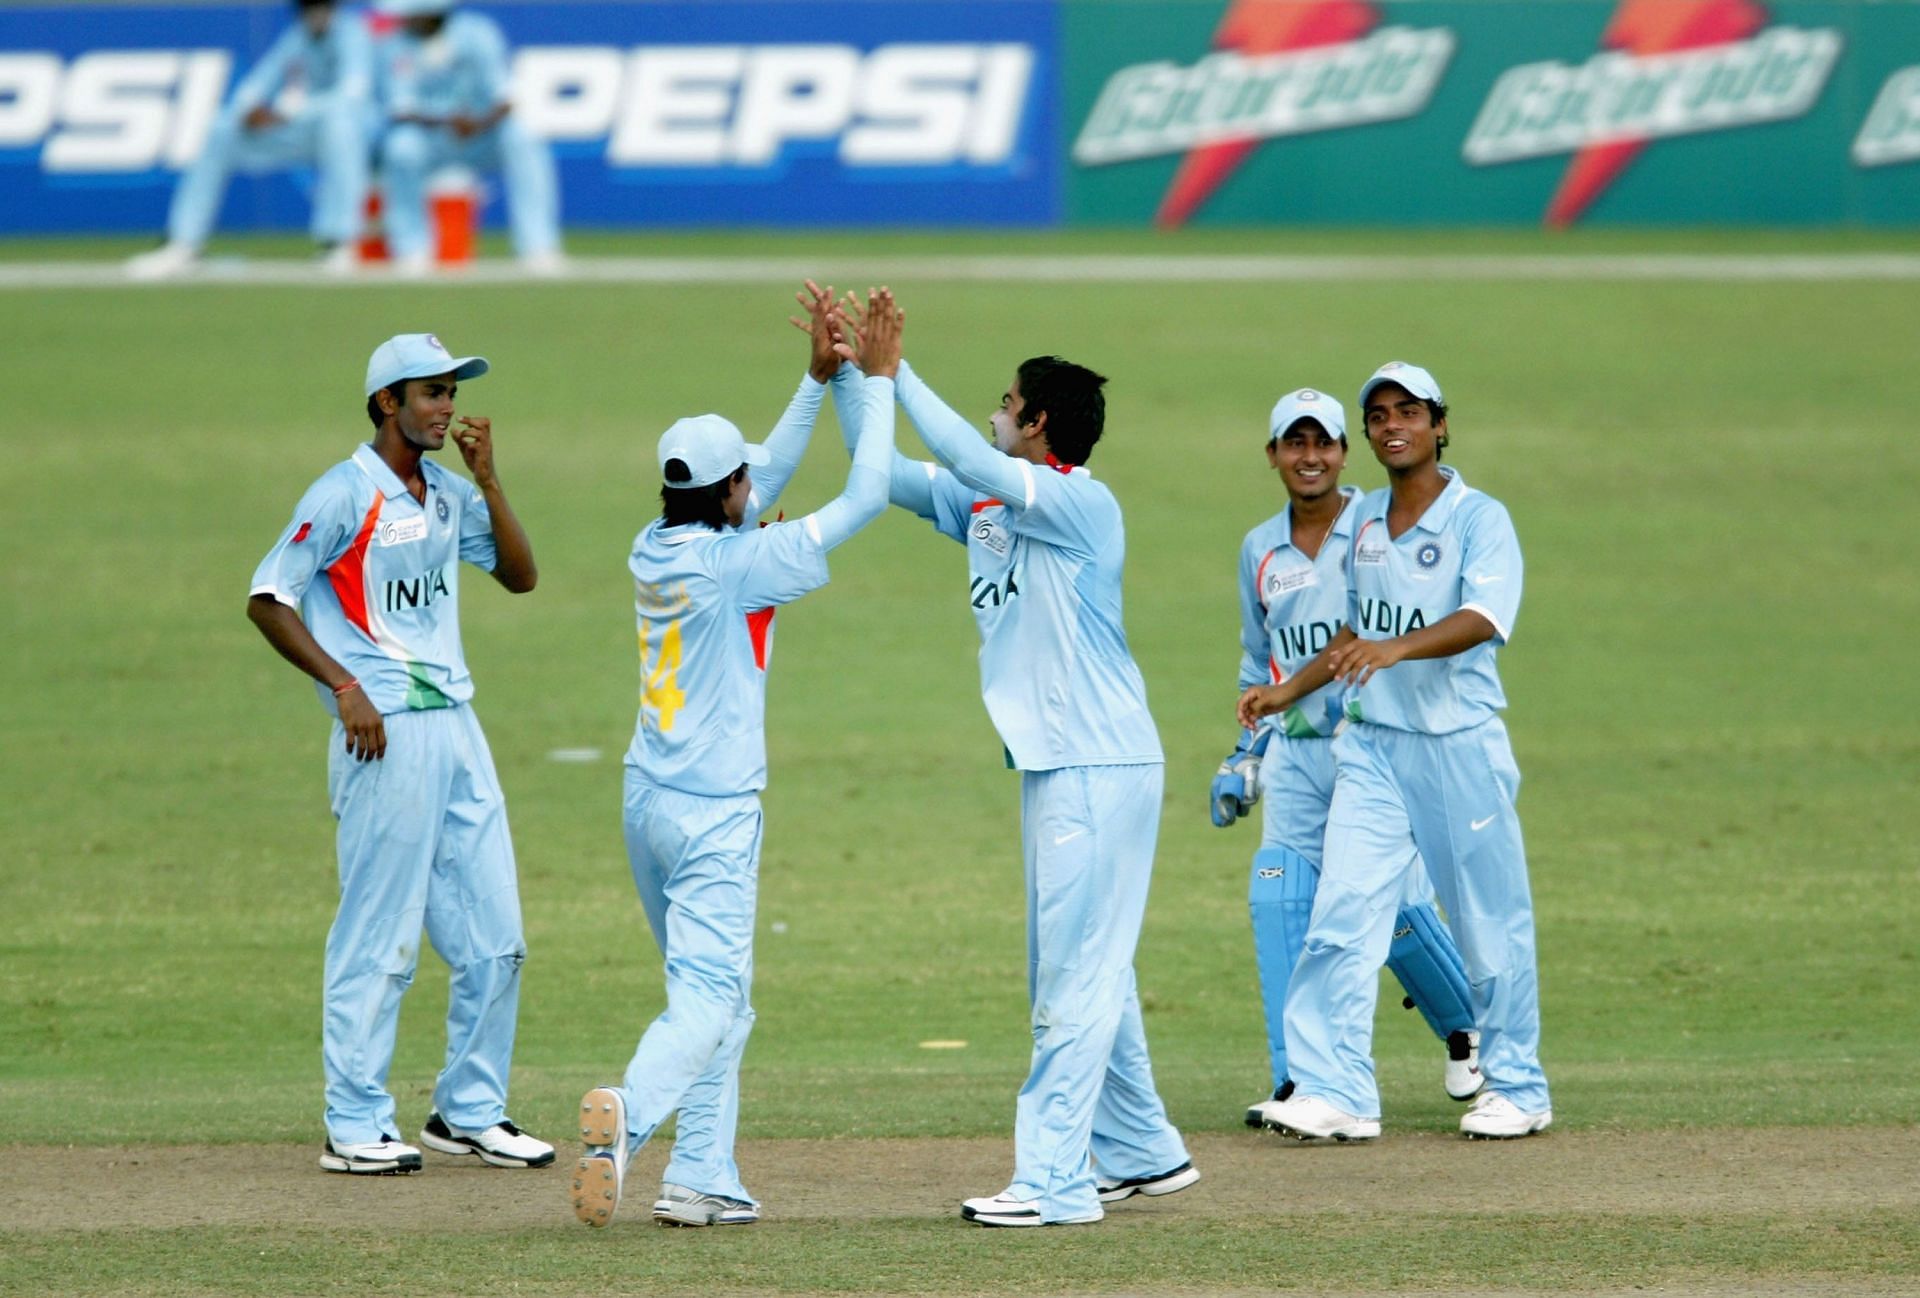 India celebrate a wicket during the 2008 ICC U19 Cricket World Cup. Pic: Getty Images